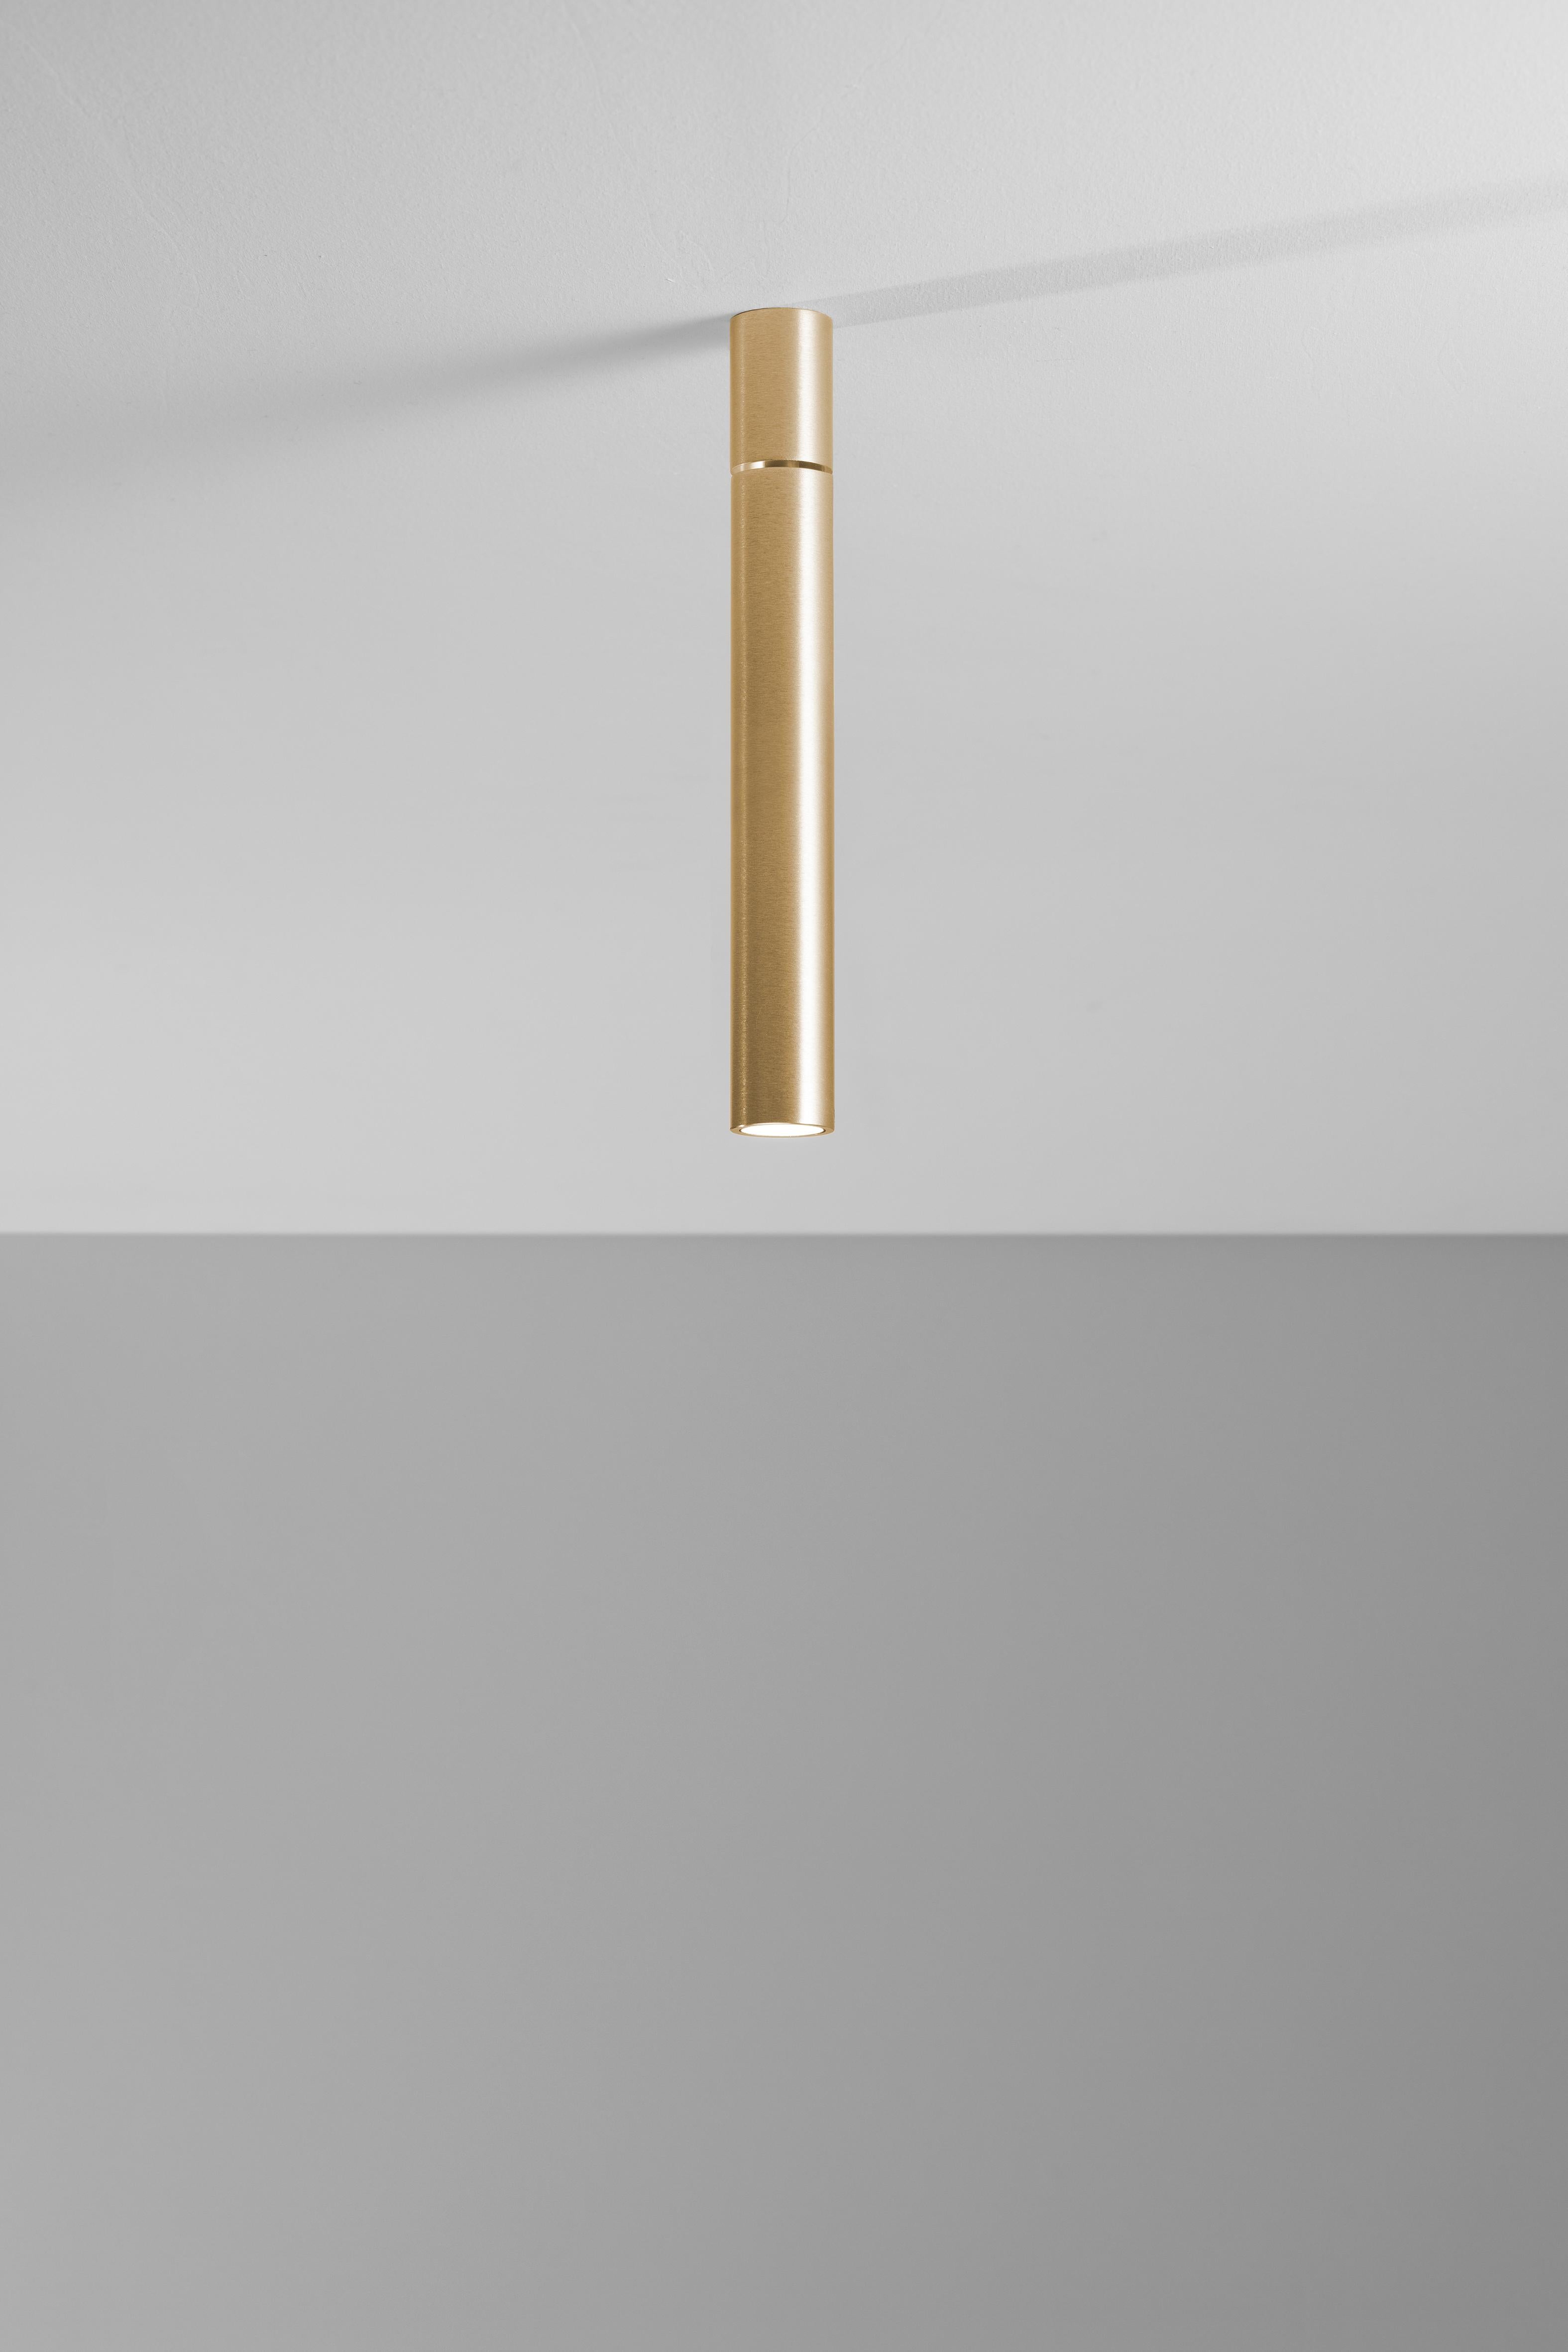 Axolight Ego Small Flush Mount Ceiling Lamp in Natural Brass by Axolight Lab

Realized entirely from natural brass, it is synthesis of elegance and personality.
The perfection of the lenses used generates a highly impressive and unexpected beam of